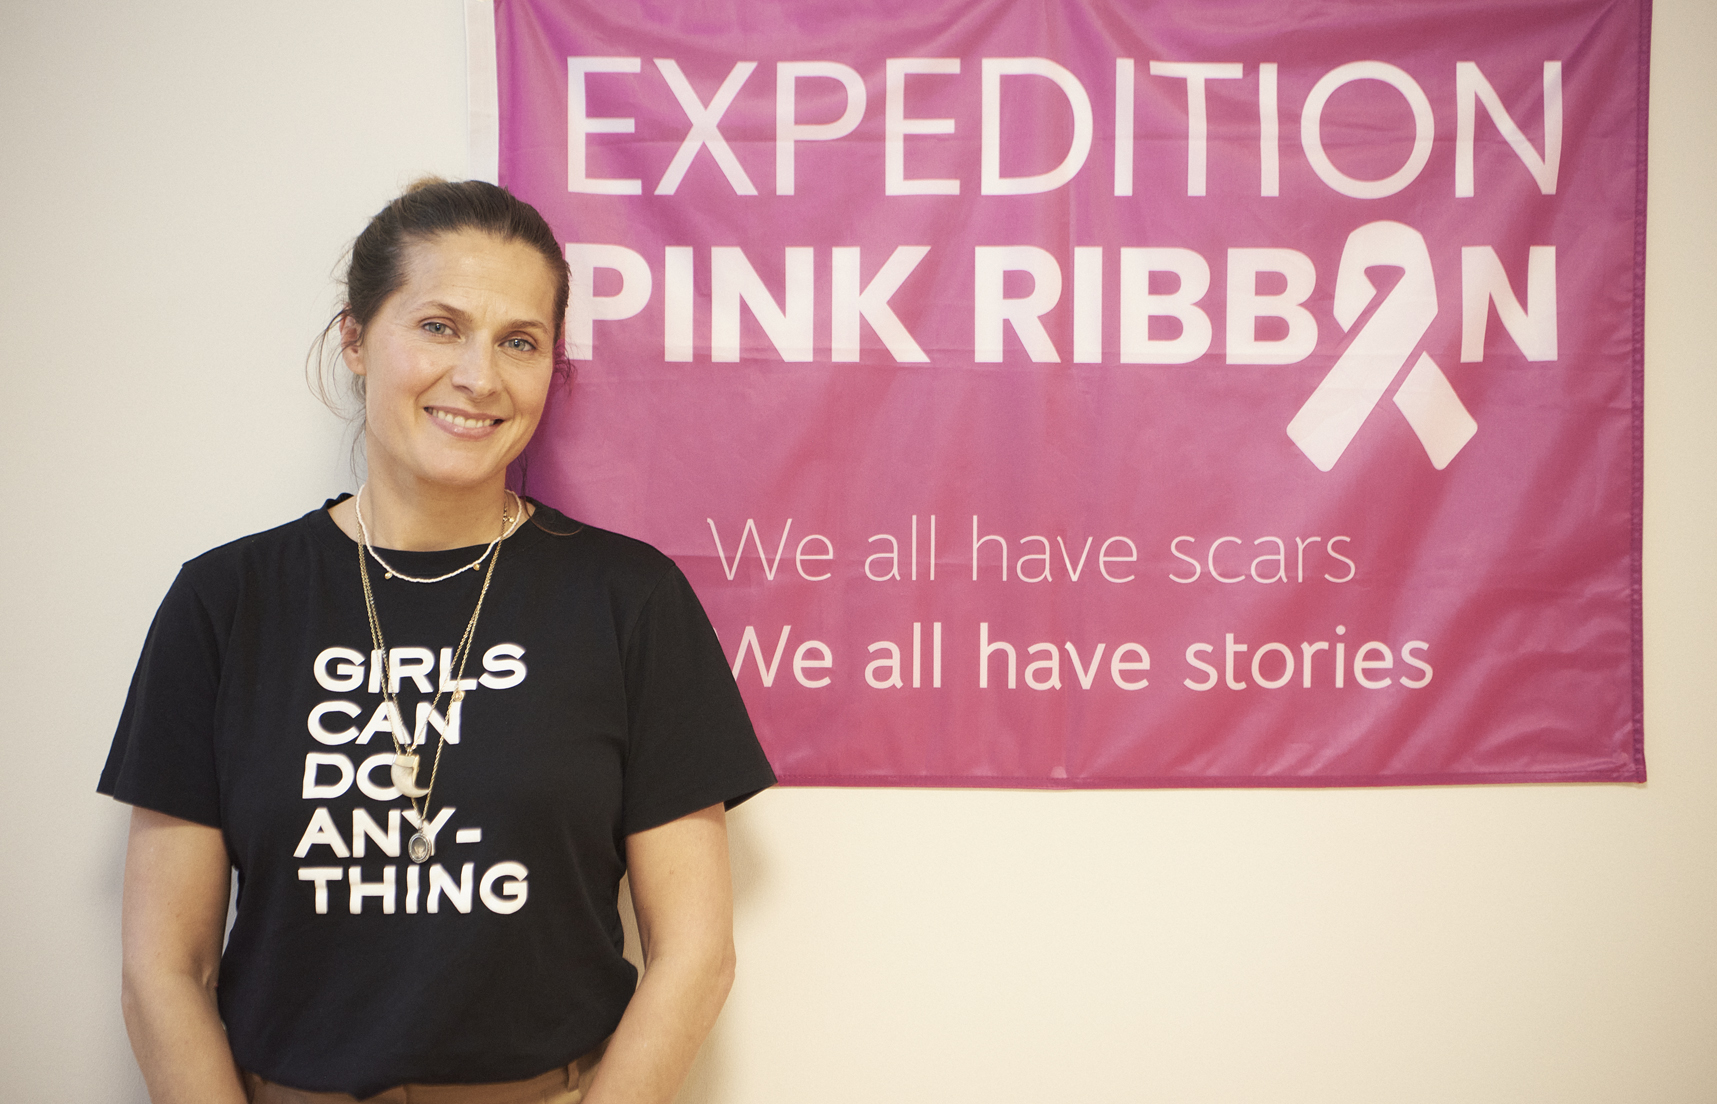 Expedition Pink Ribbon med Andrea Rudolph - Støt Brysterne